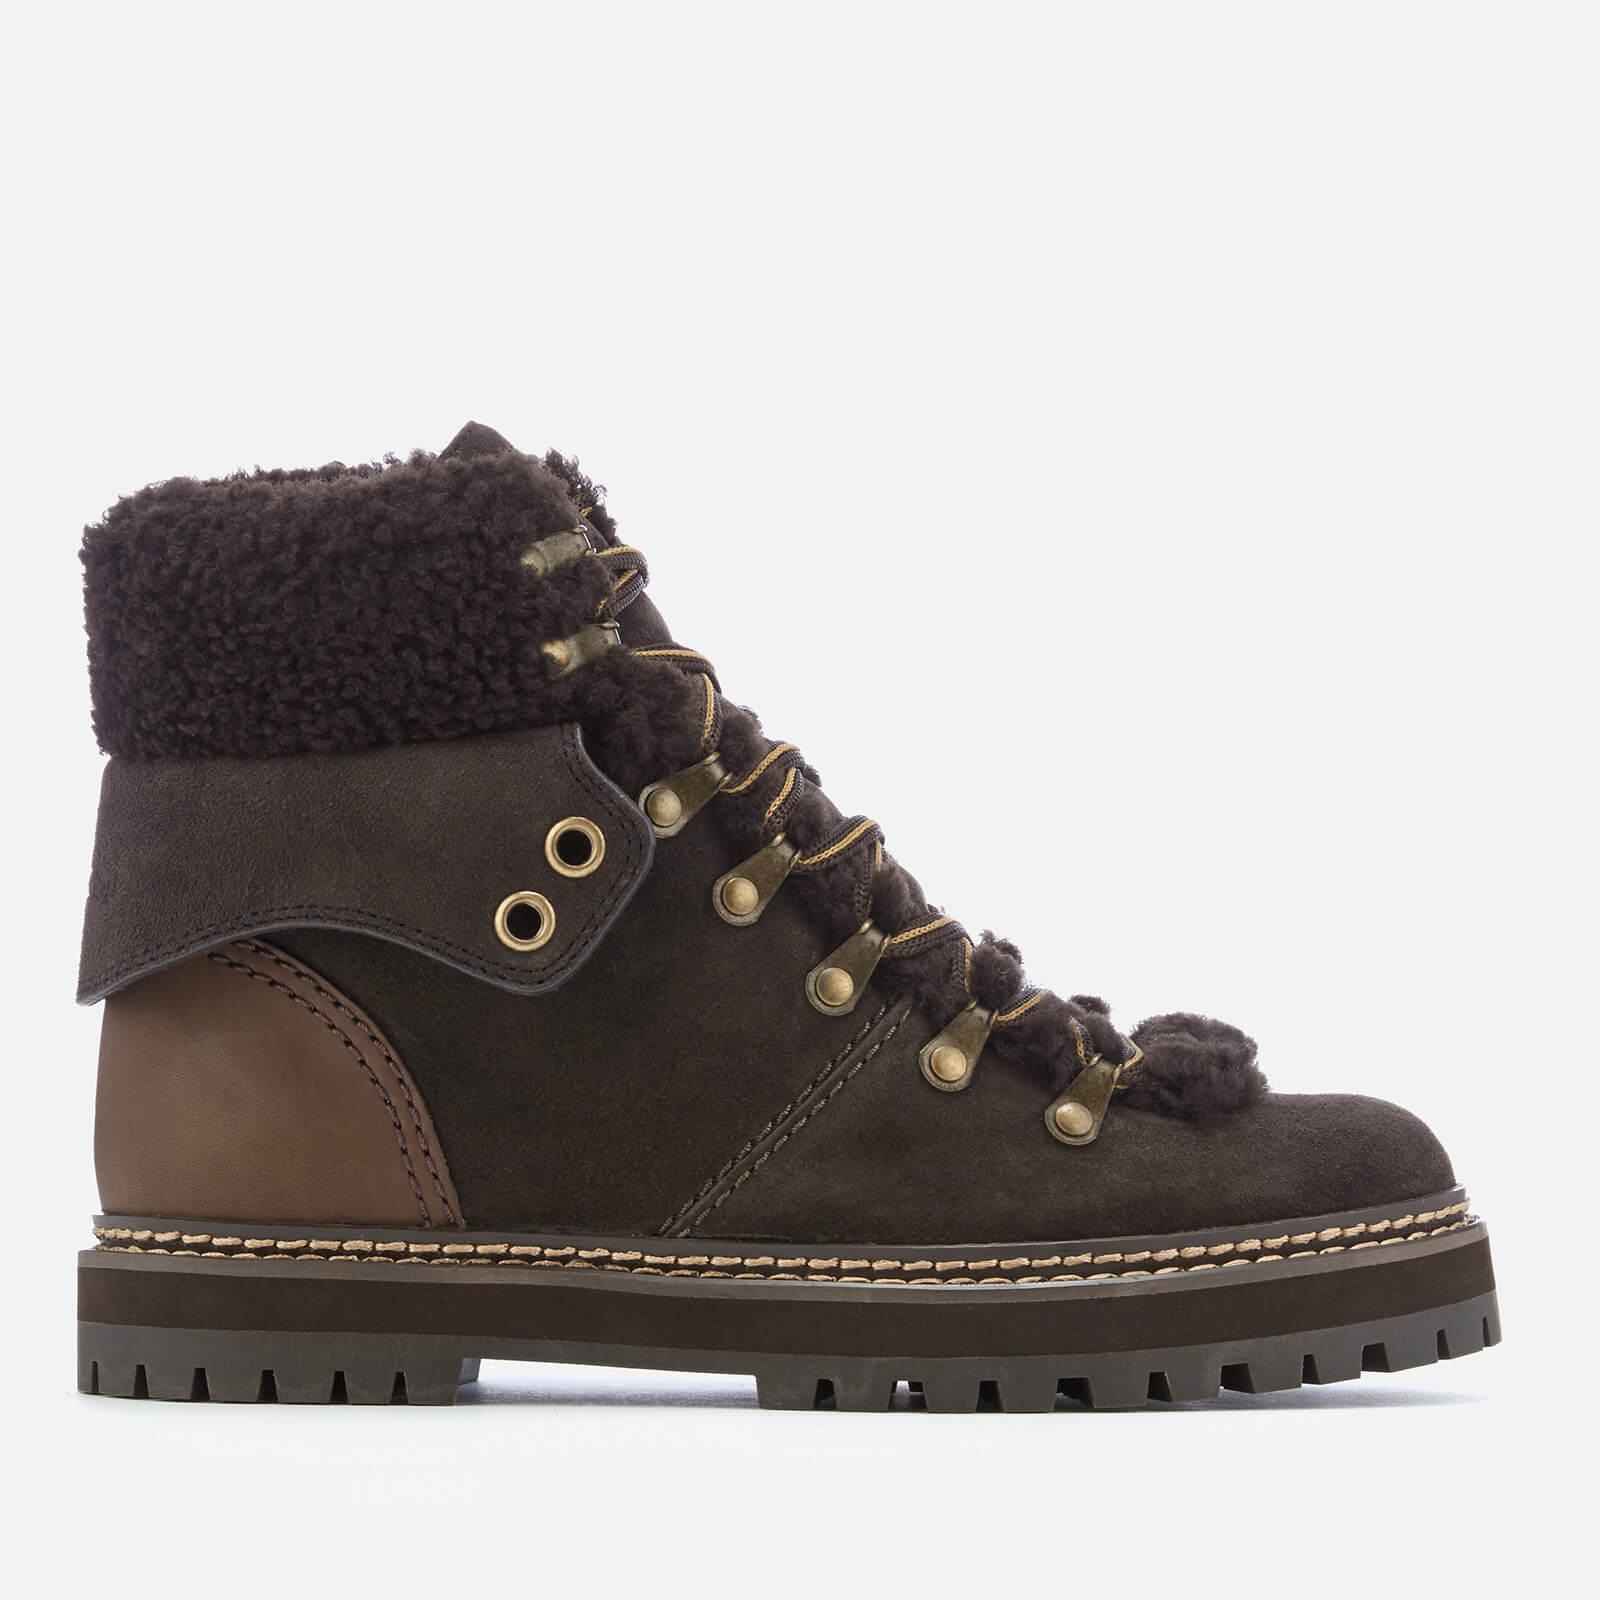 See By Chloé Women's Suede/Shearling Lined Hiking Styled Boots ...